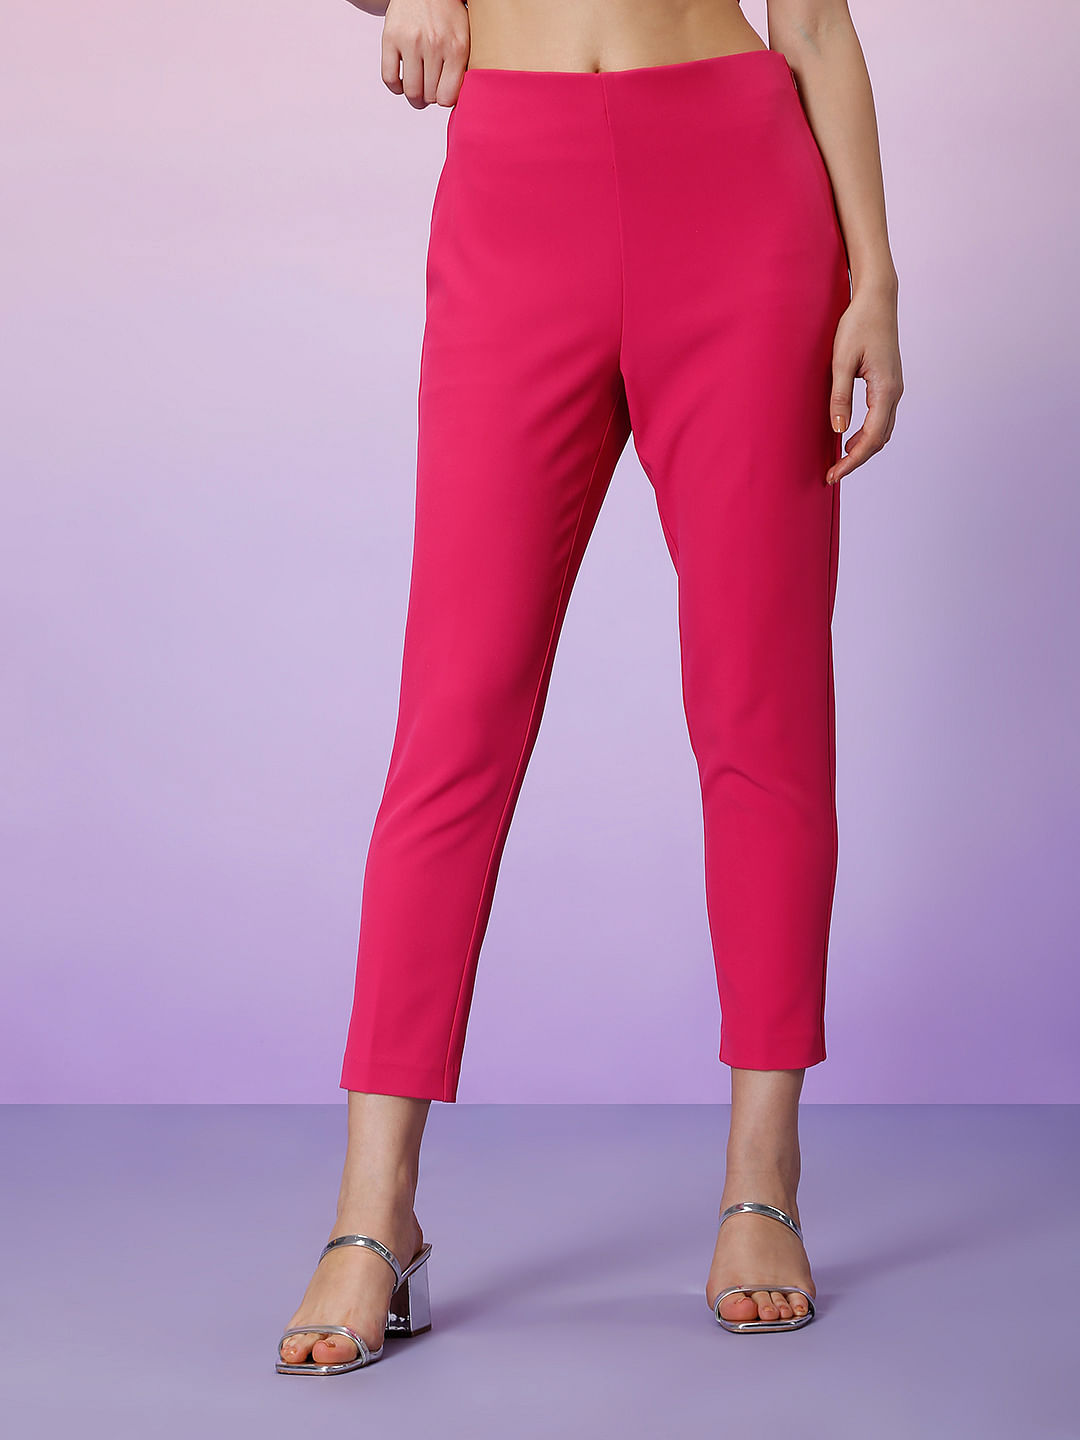 Pink Pants & Styling Guide - FashionActivation